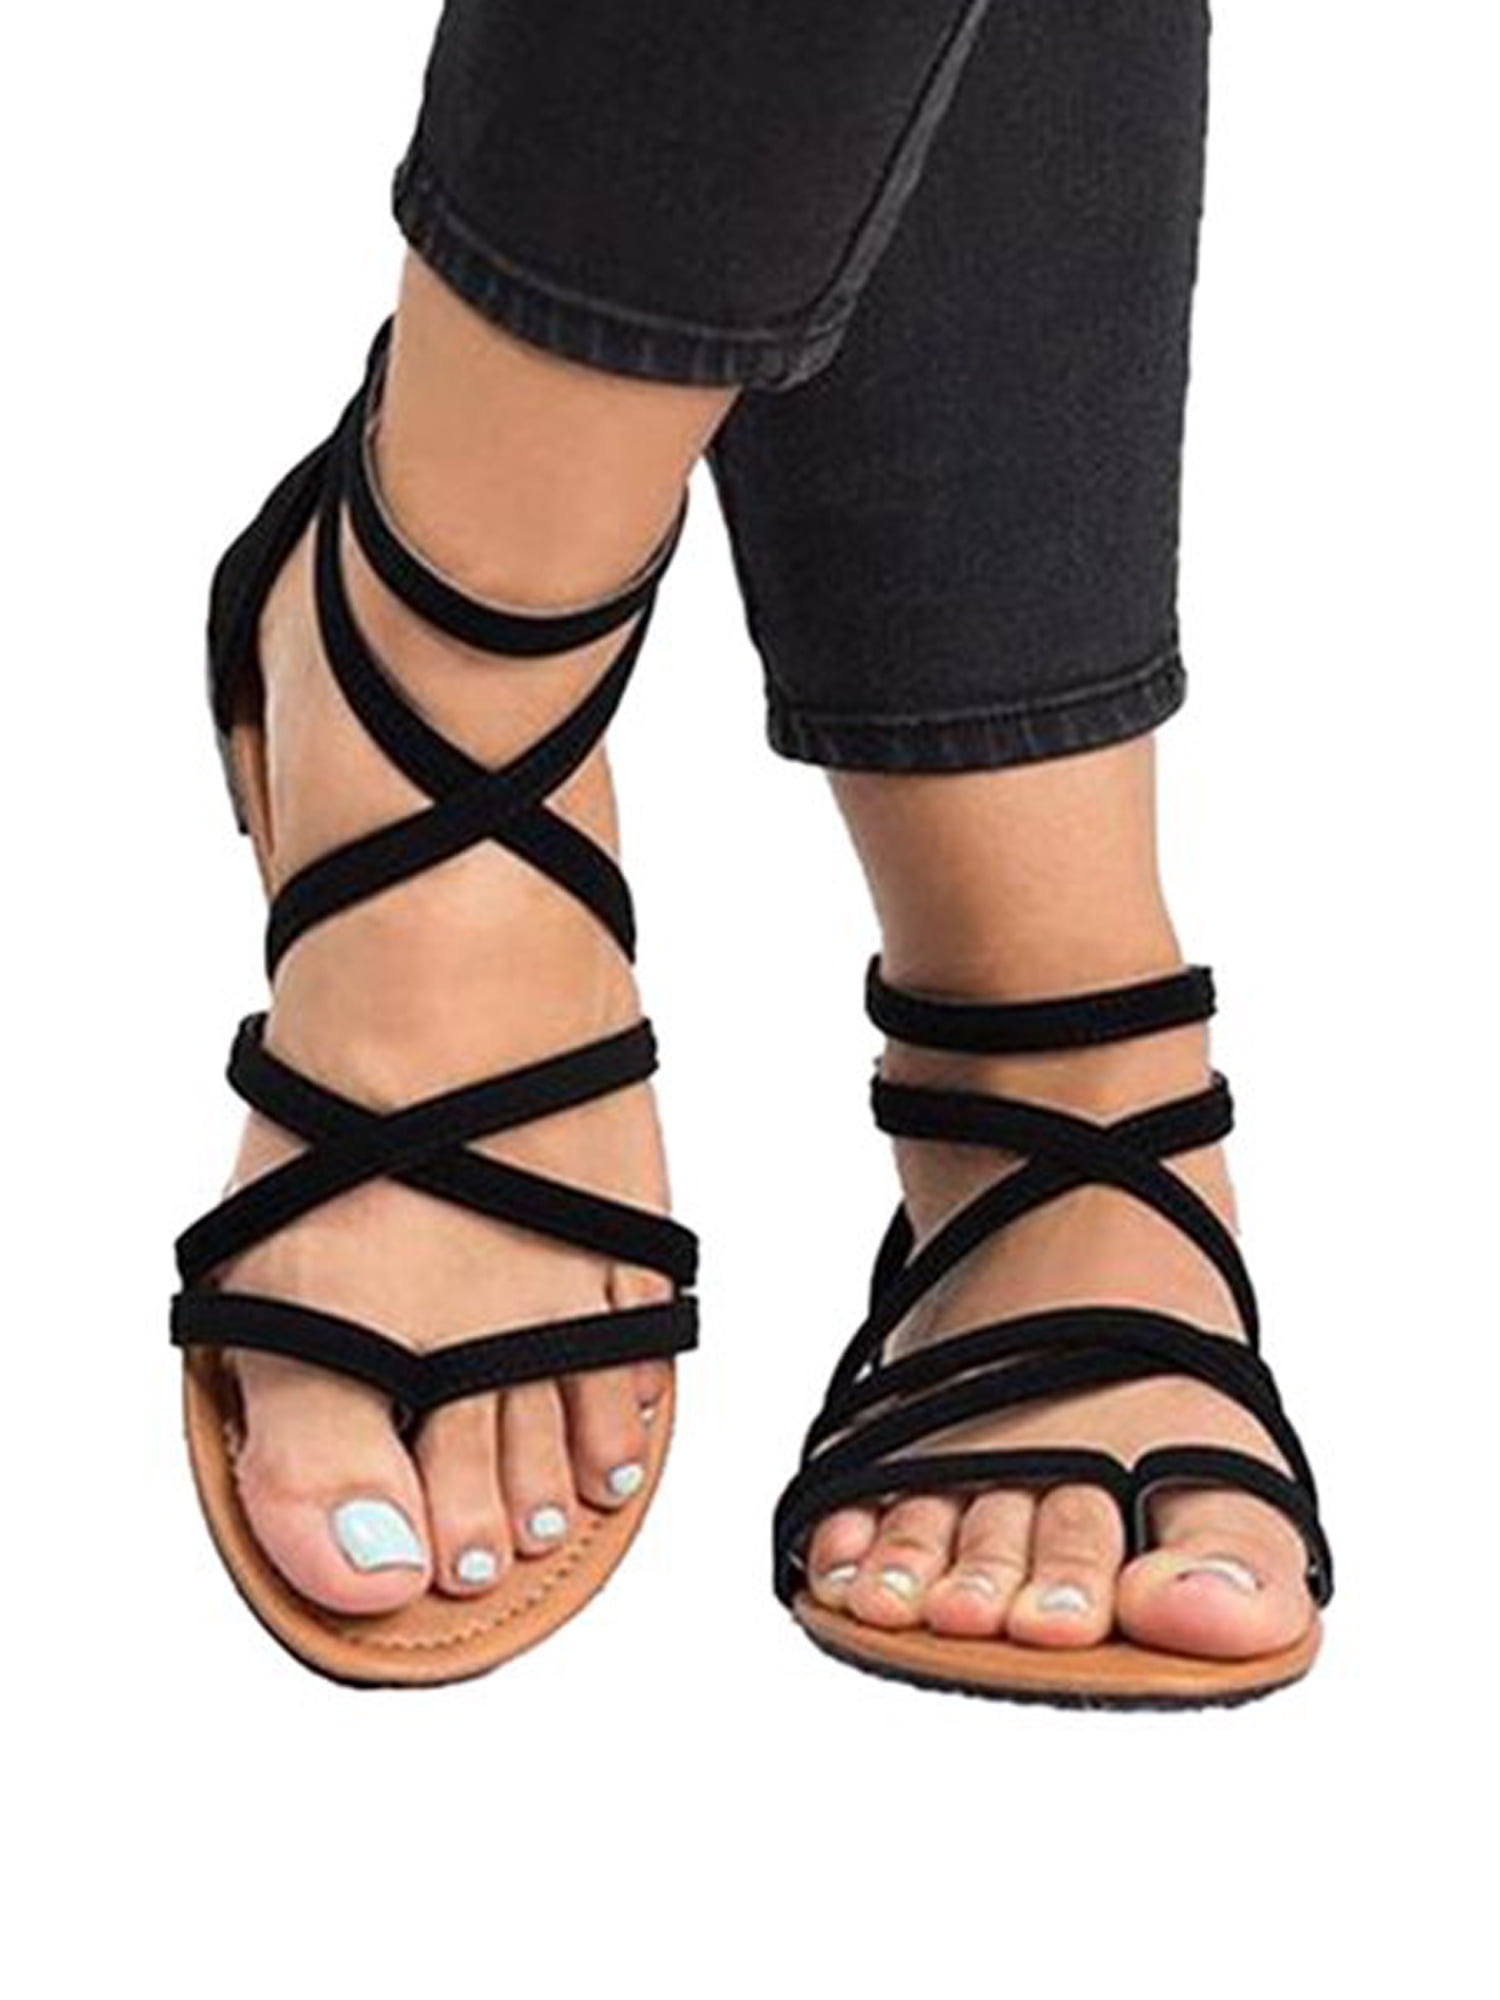 Ladies Womens Flats Lace Up Starppy Gladiator Summer Fashion Sandals Shoes Sizes 